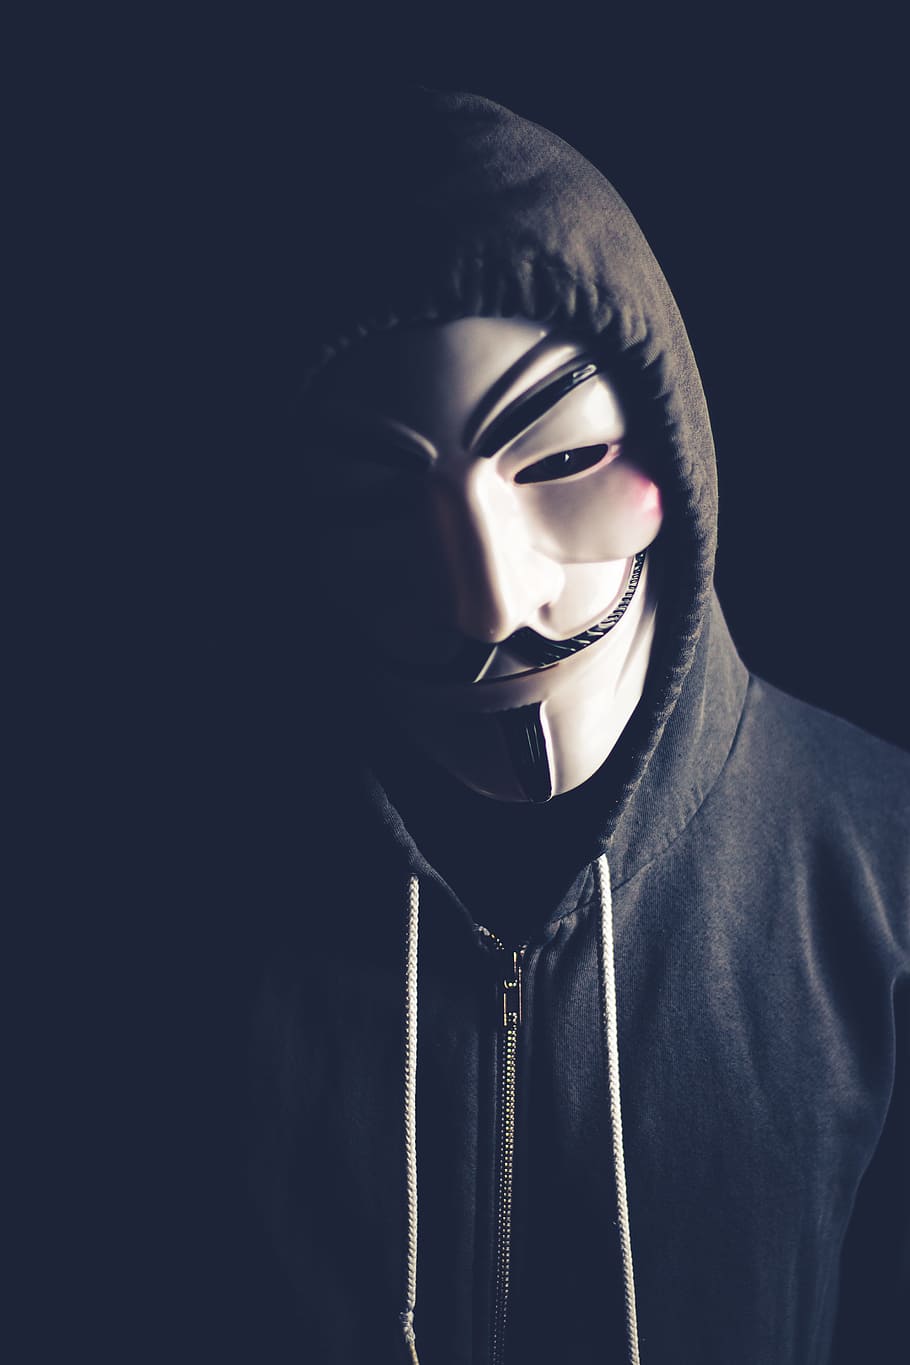 HD Wallpaper: Person In Guy Fawkes Mask And Grey Zip Up Drawstring